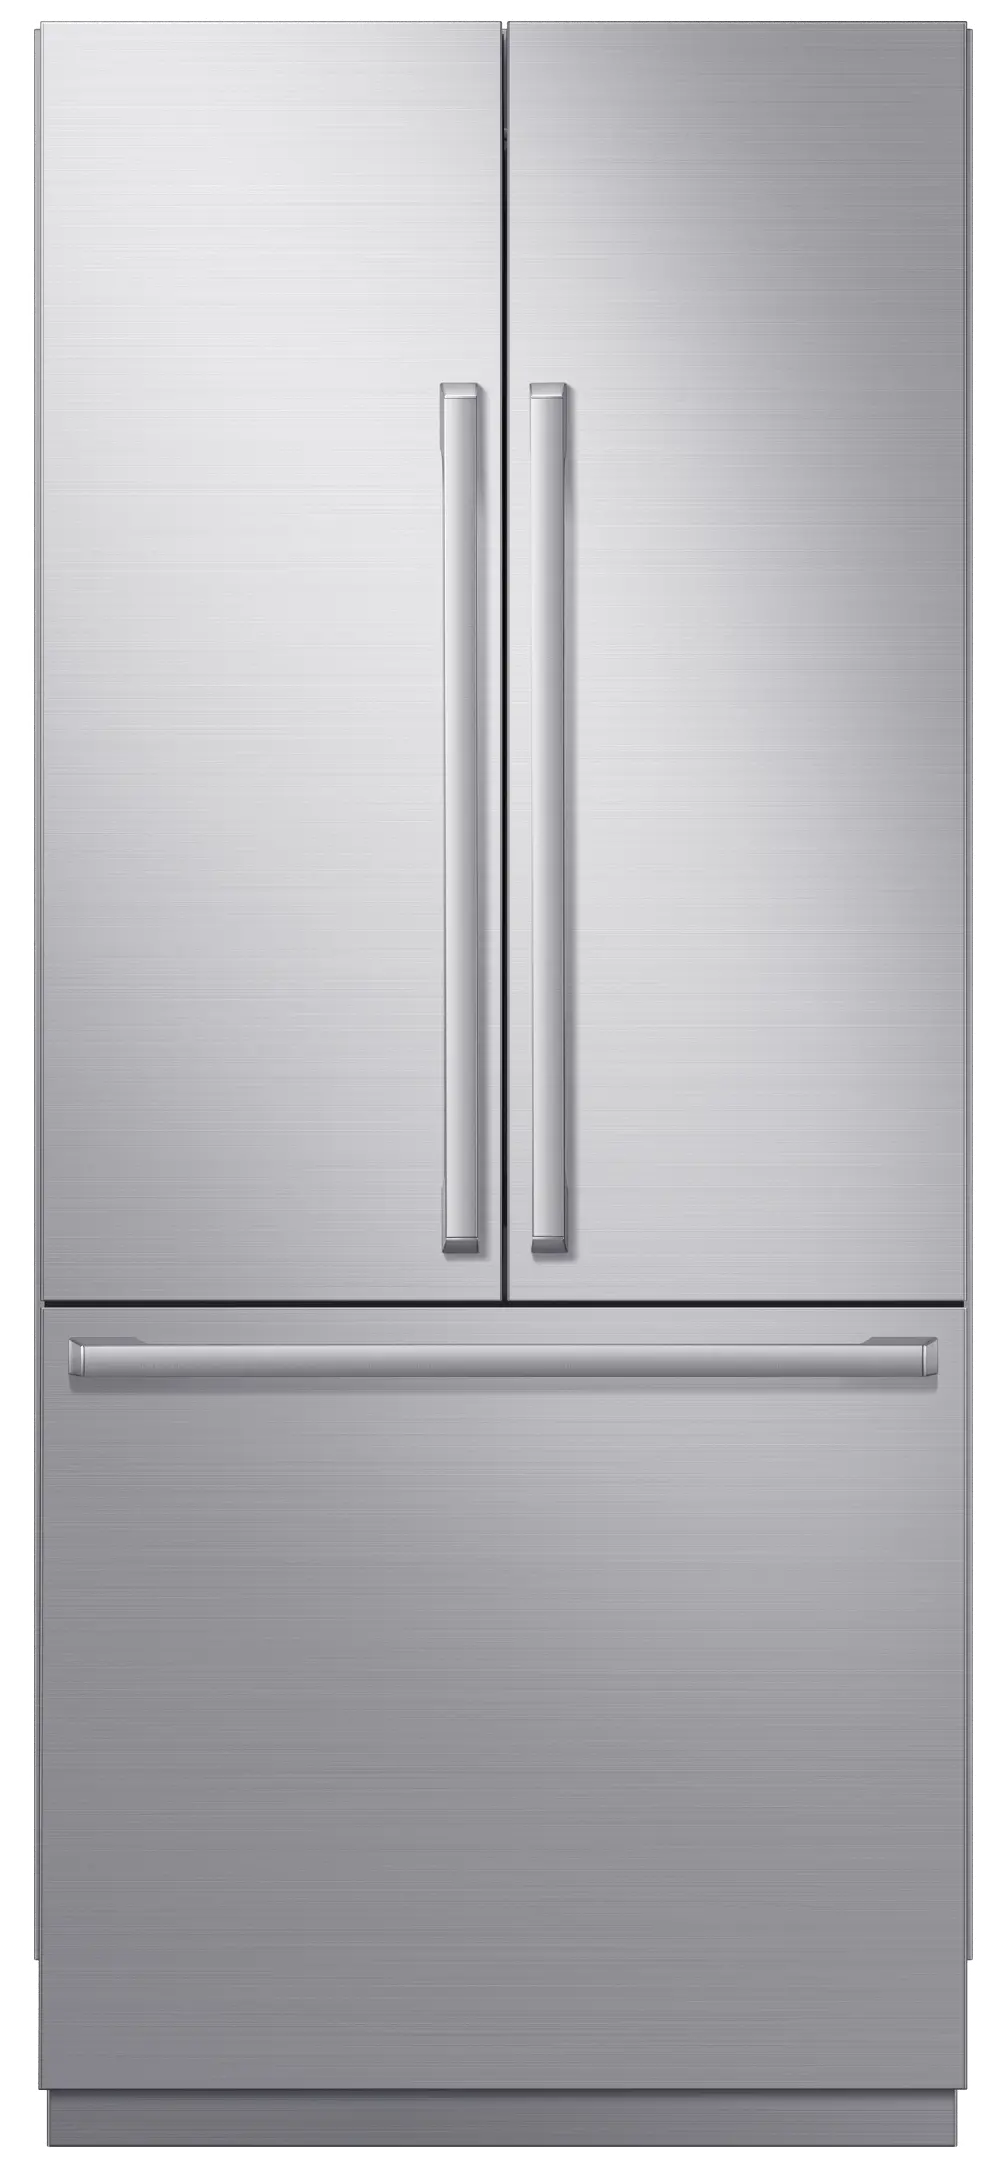 BRF365200AP Samsung Chef 21 cu. ft. French Door Refrigerator - 36 Inch Built In Panel Ready-1